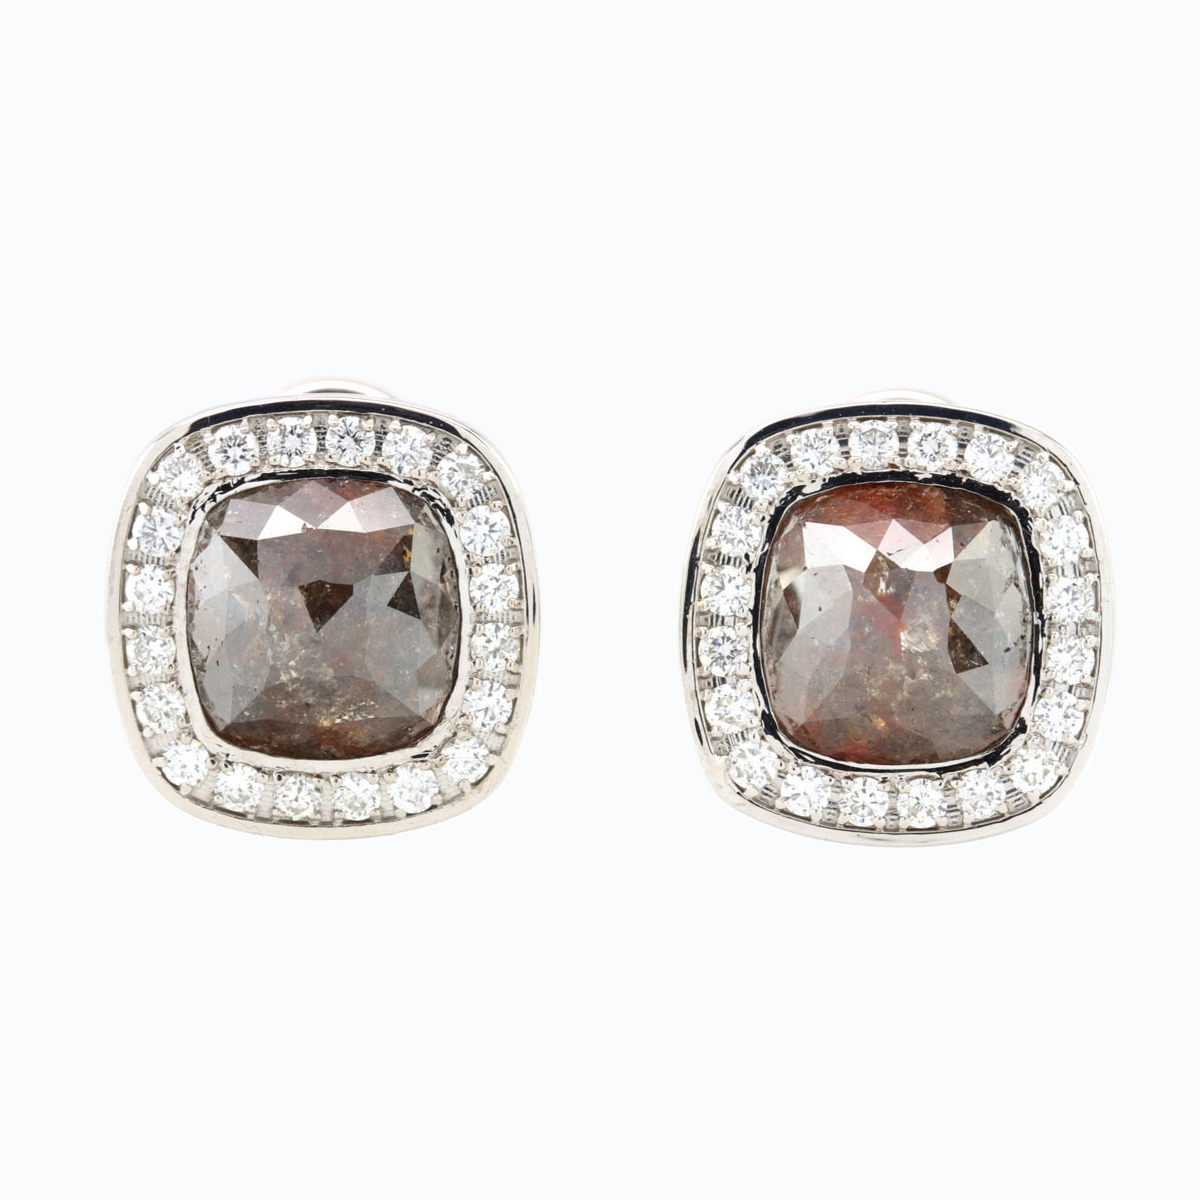 Chocolate Cabochon Fancy Colored Diamond Earrings 14K White Gold